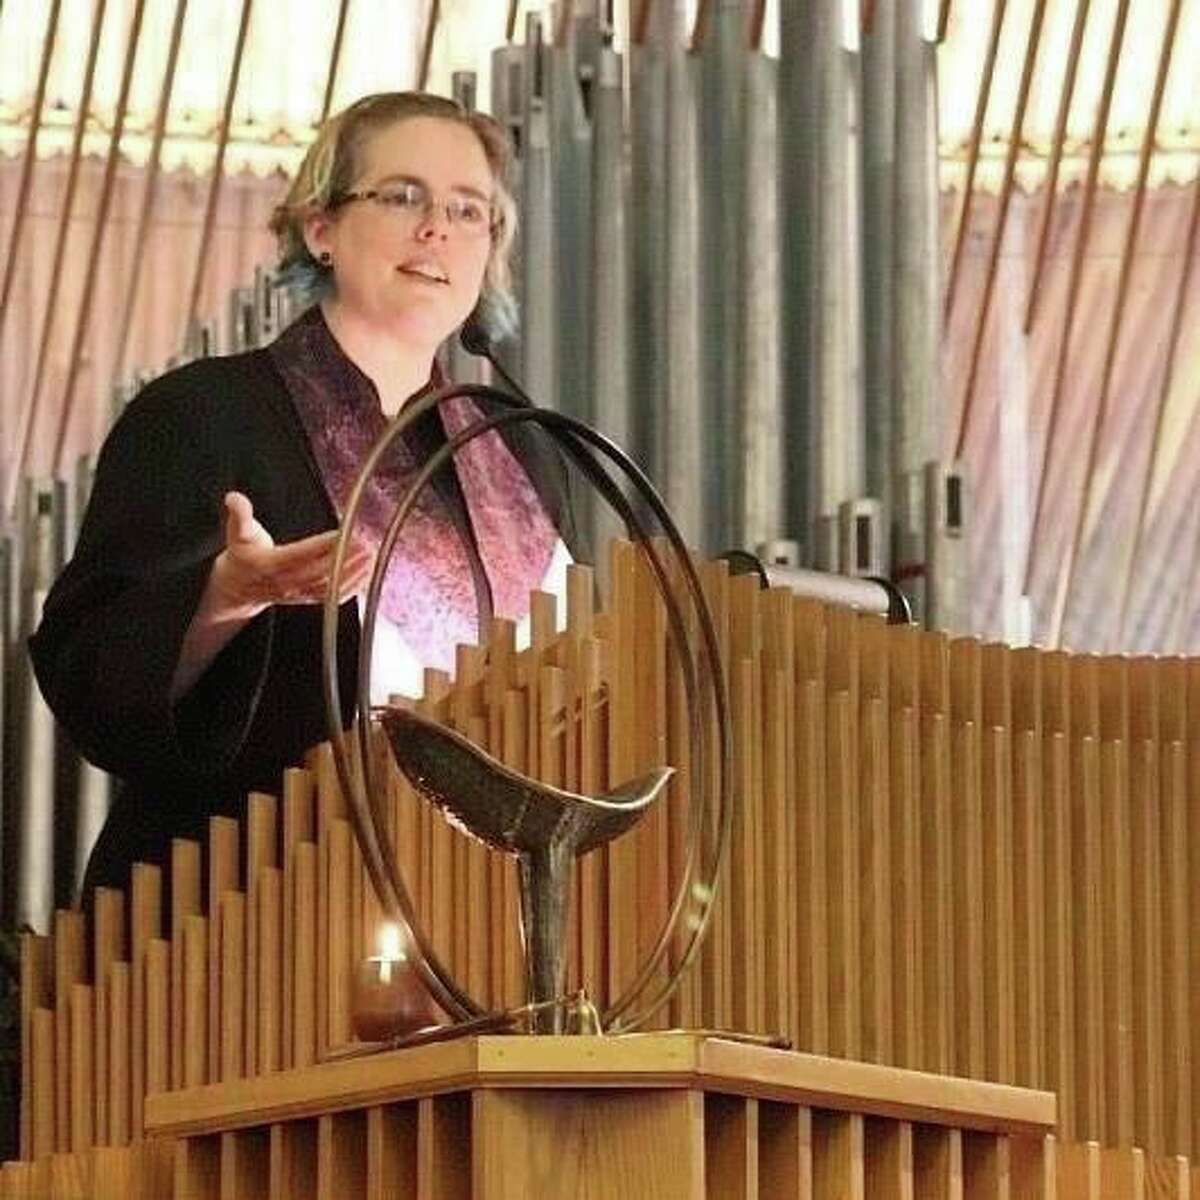 The Rev. Heather Rion Starr is a consulting minister at the Unitarian Universalist Congregation of Danbury.